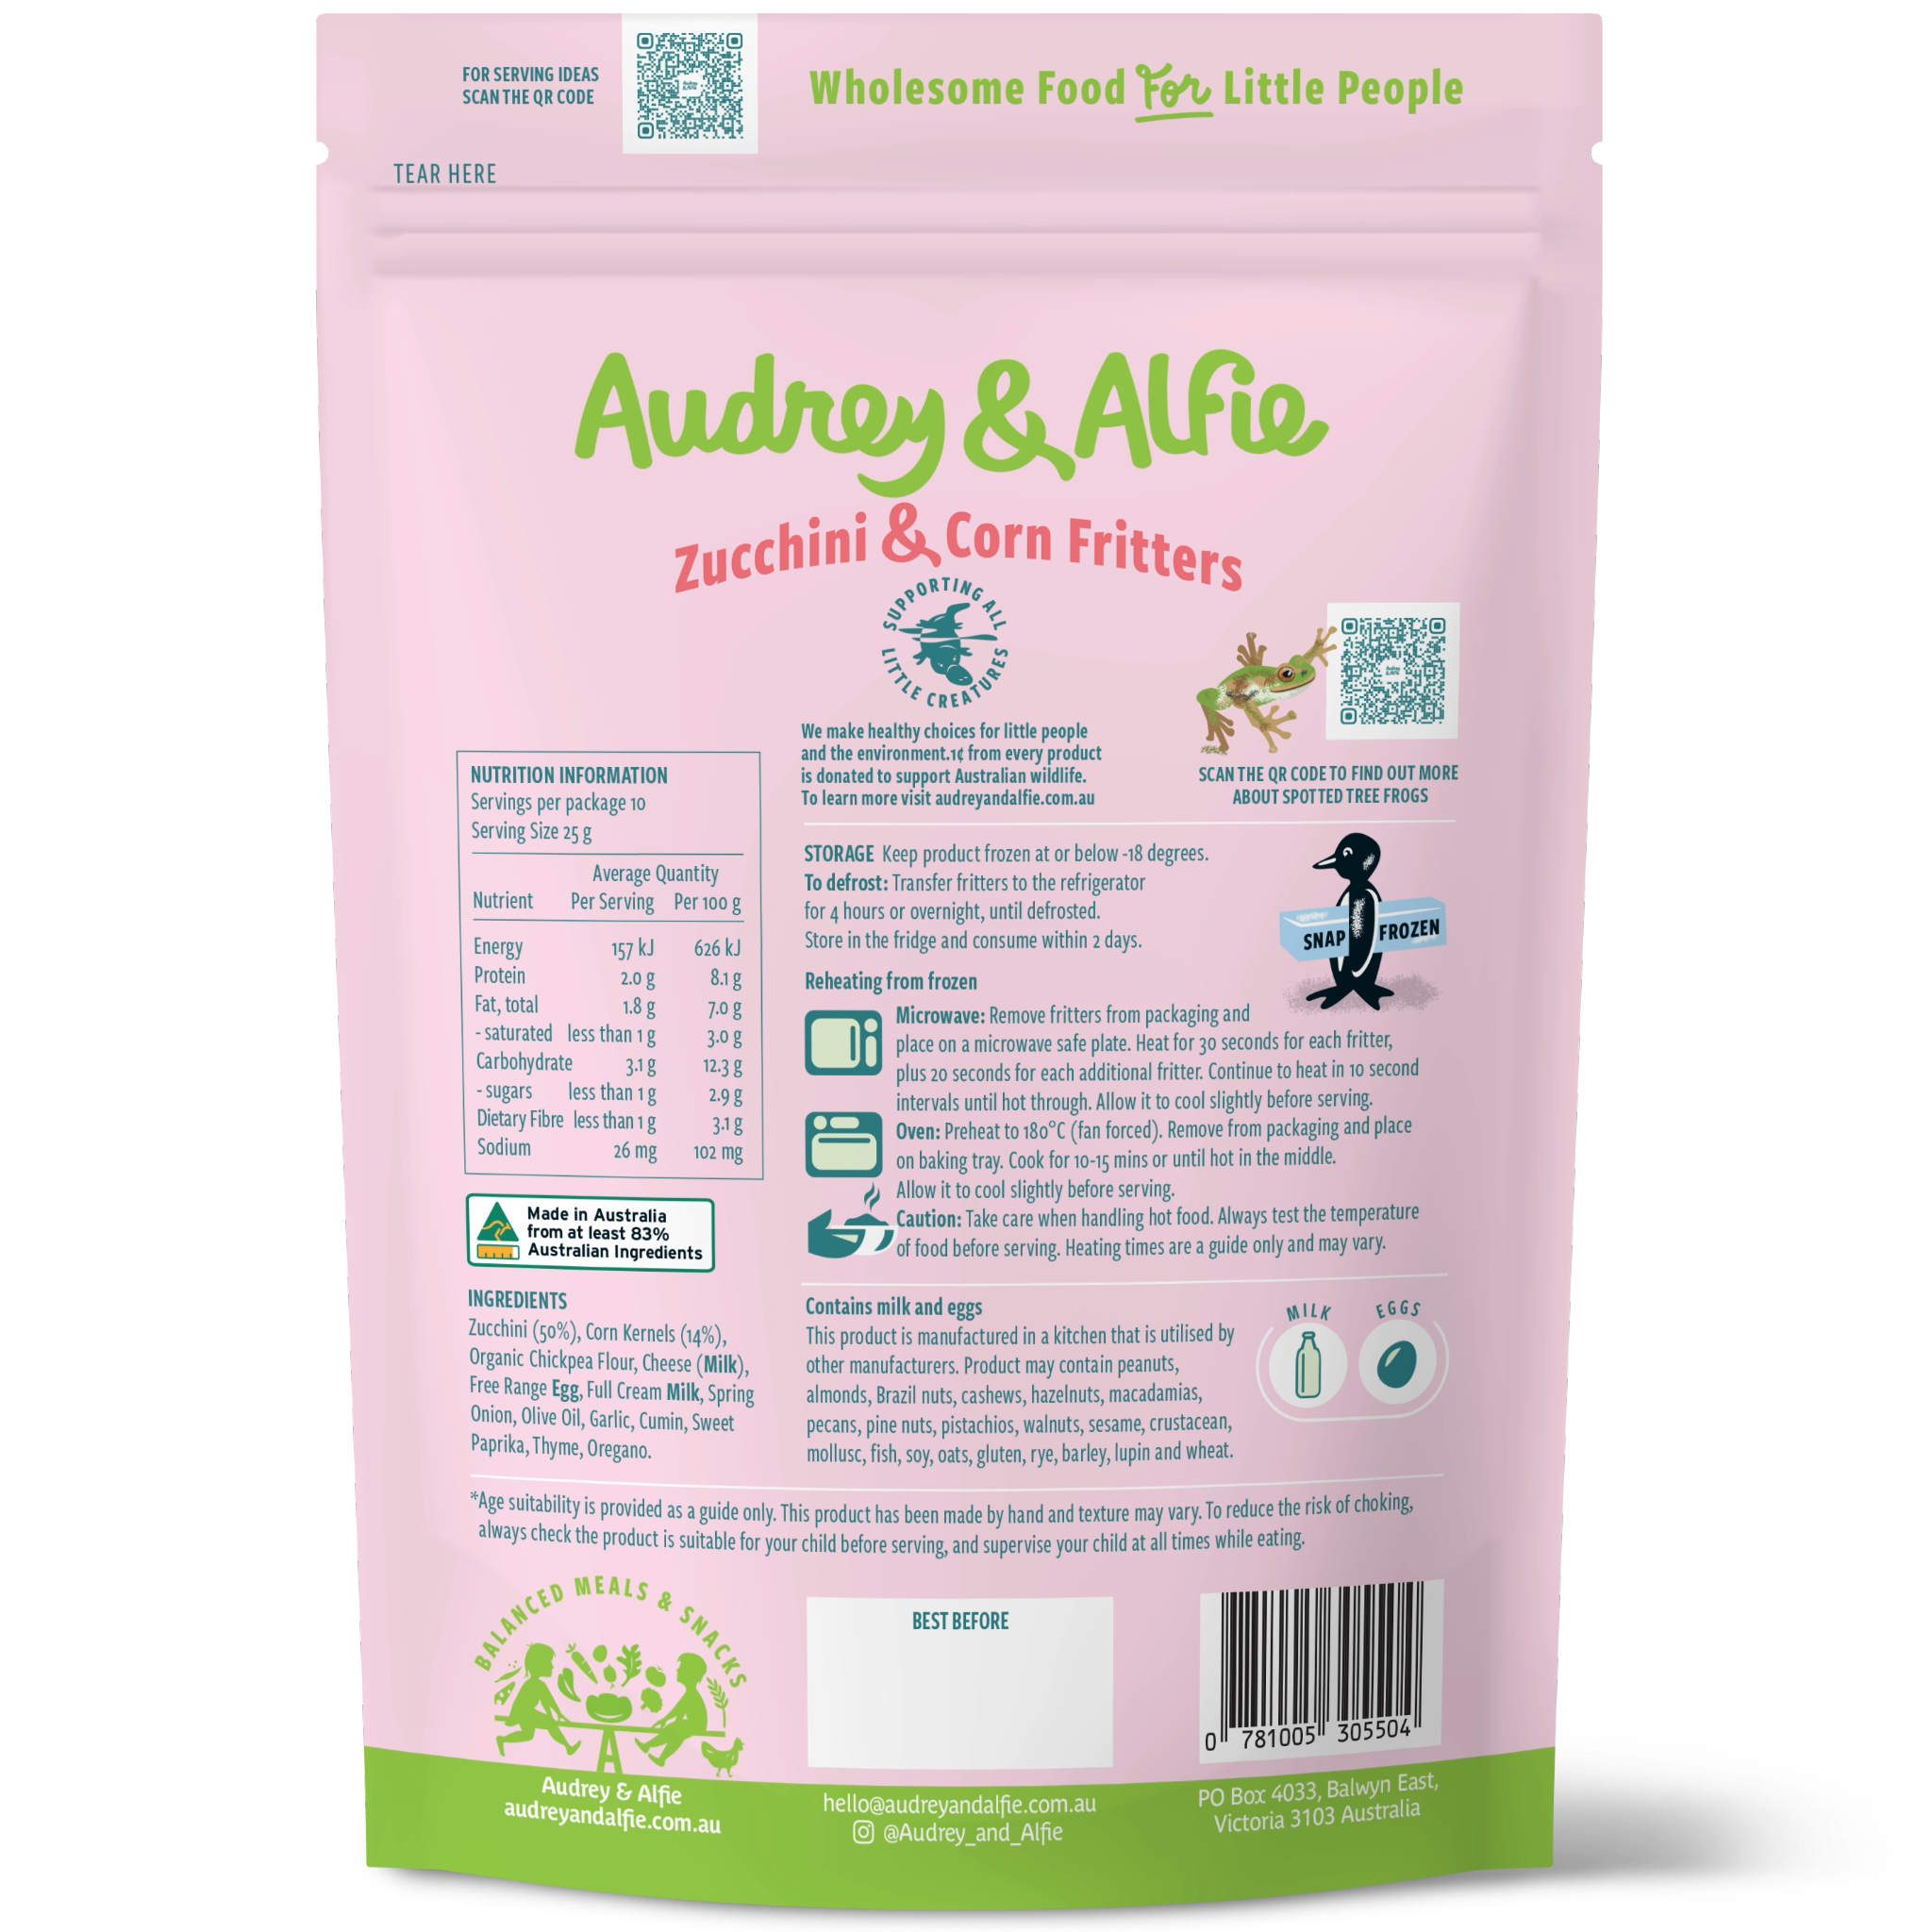 Zucchini & Corn Fritters from Audrey and Alfie - Back of Packet with Nutrition Information Panel